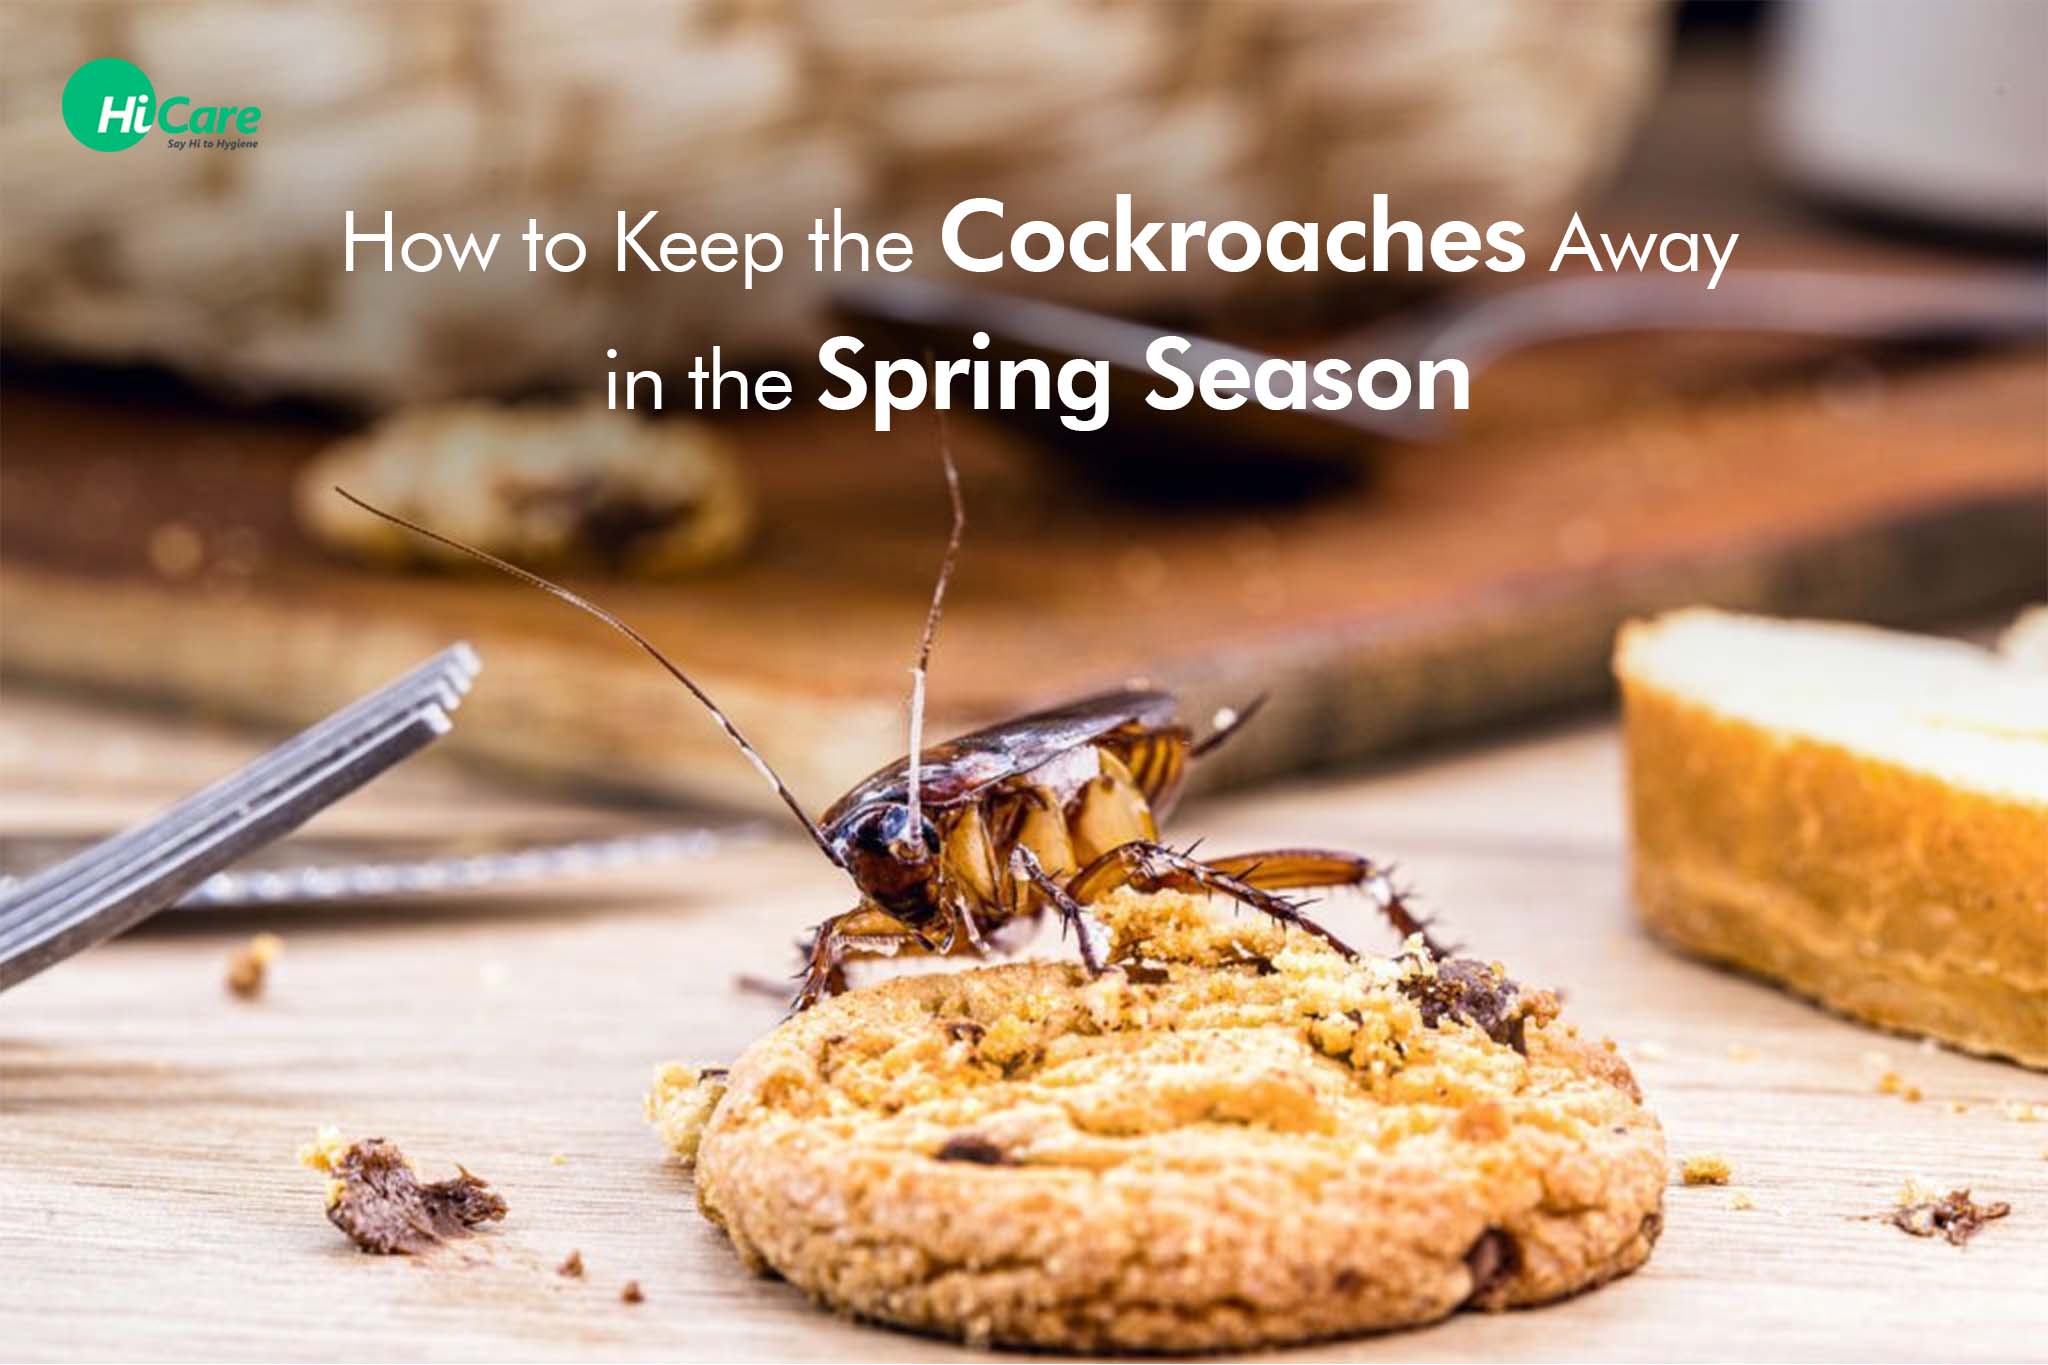 7 Tips to Keep Cockroaches Away in Spring Season | HiCare